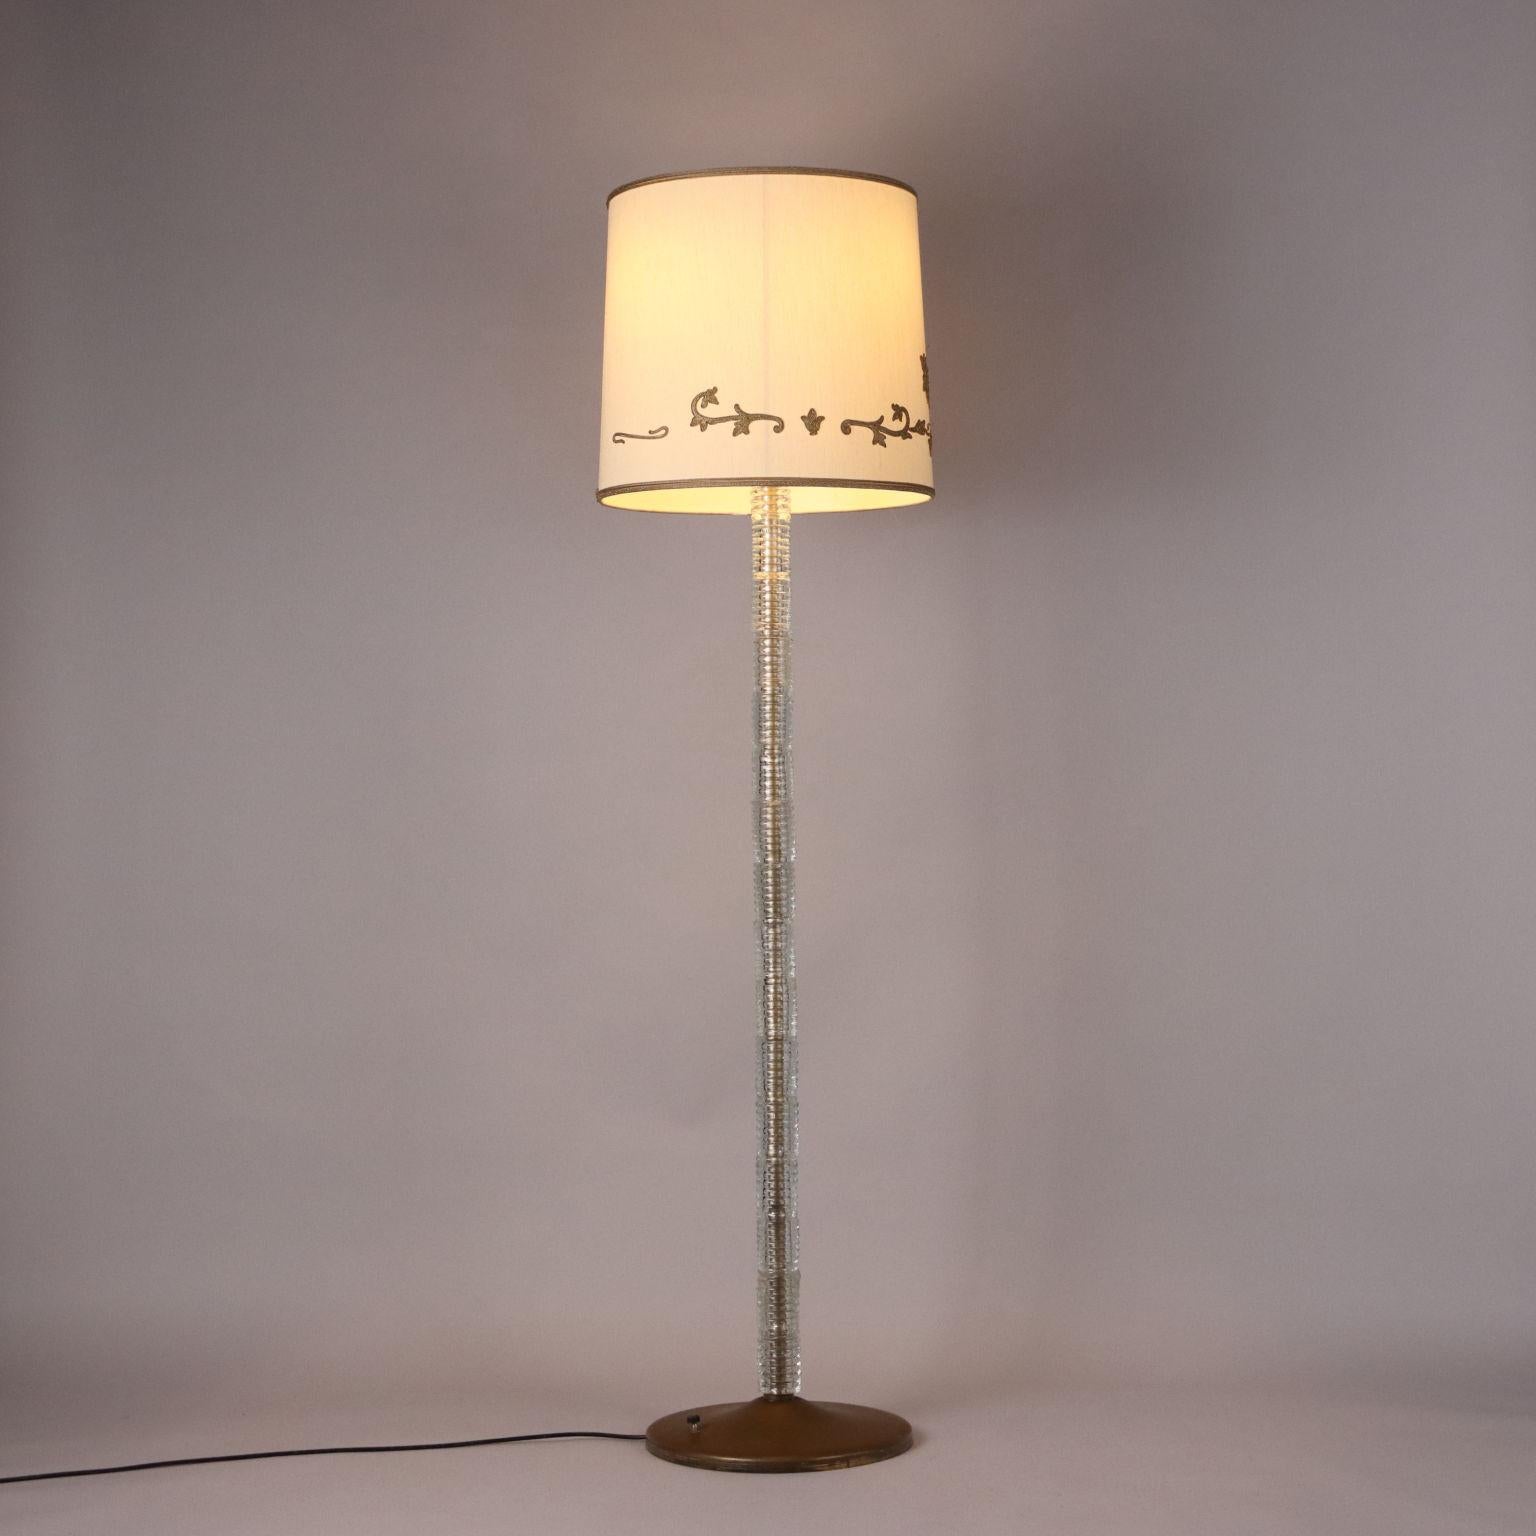 Floor lamp made of brass and blown glass, diffuser made of plasticized fabric. Good condition, has one glass break at the base, as pictured.